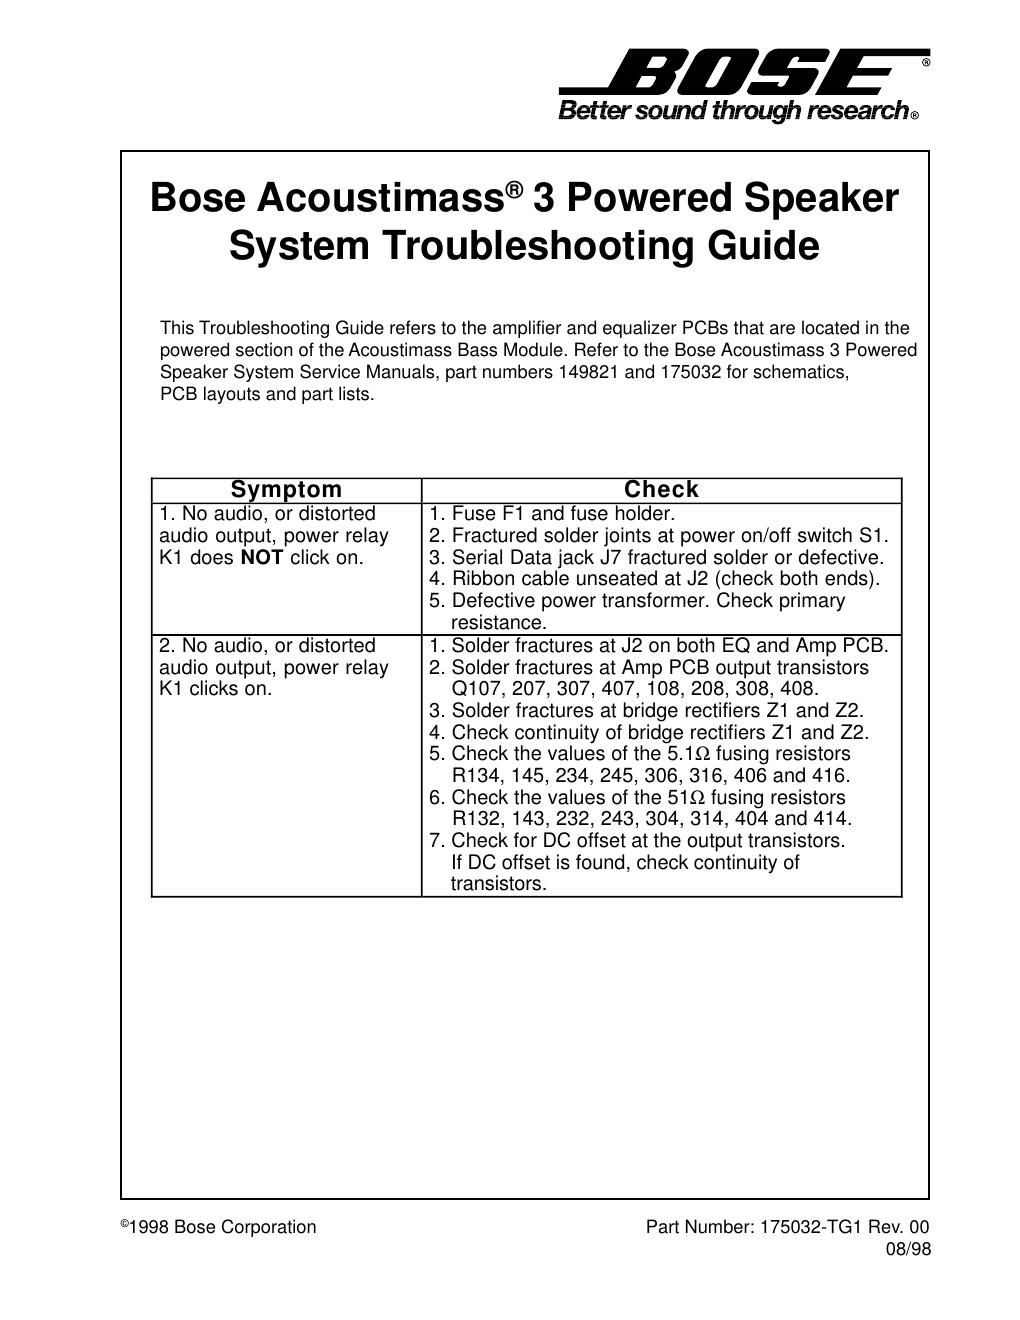 bose am 3p troubleshooting guide175032 tg1